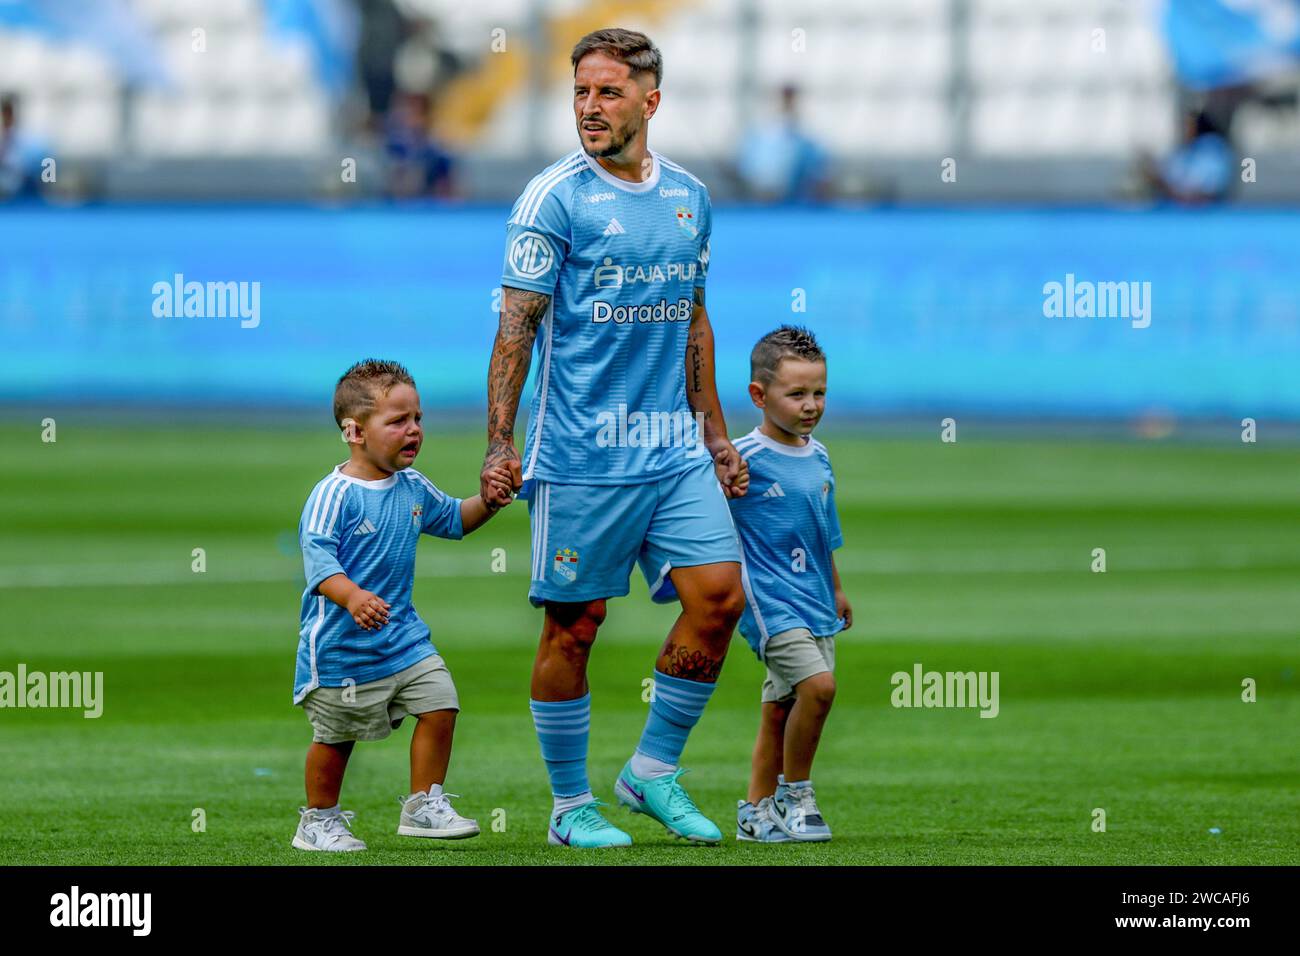 Lima, Peru. 14th Jan, 2024. Alejandro Hohberg of Sporting Cristal during the friendly match between Sporting Cristal and Universidad Catolica de Chile played at Nacional Stadium on January 14, 2024 in Lima, Peru. (Photo by Miguel Marrufo/PRESSINPHOTO) Credit: PRESSINPHOTO SPORTS AGENCY/Alamy Live News Stock Photo